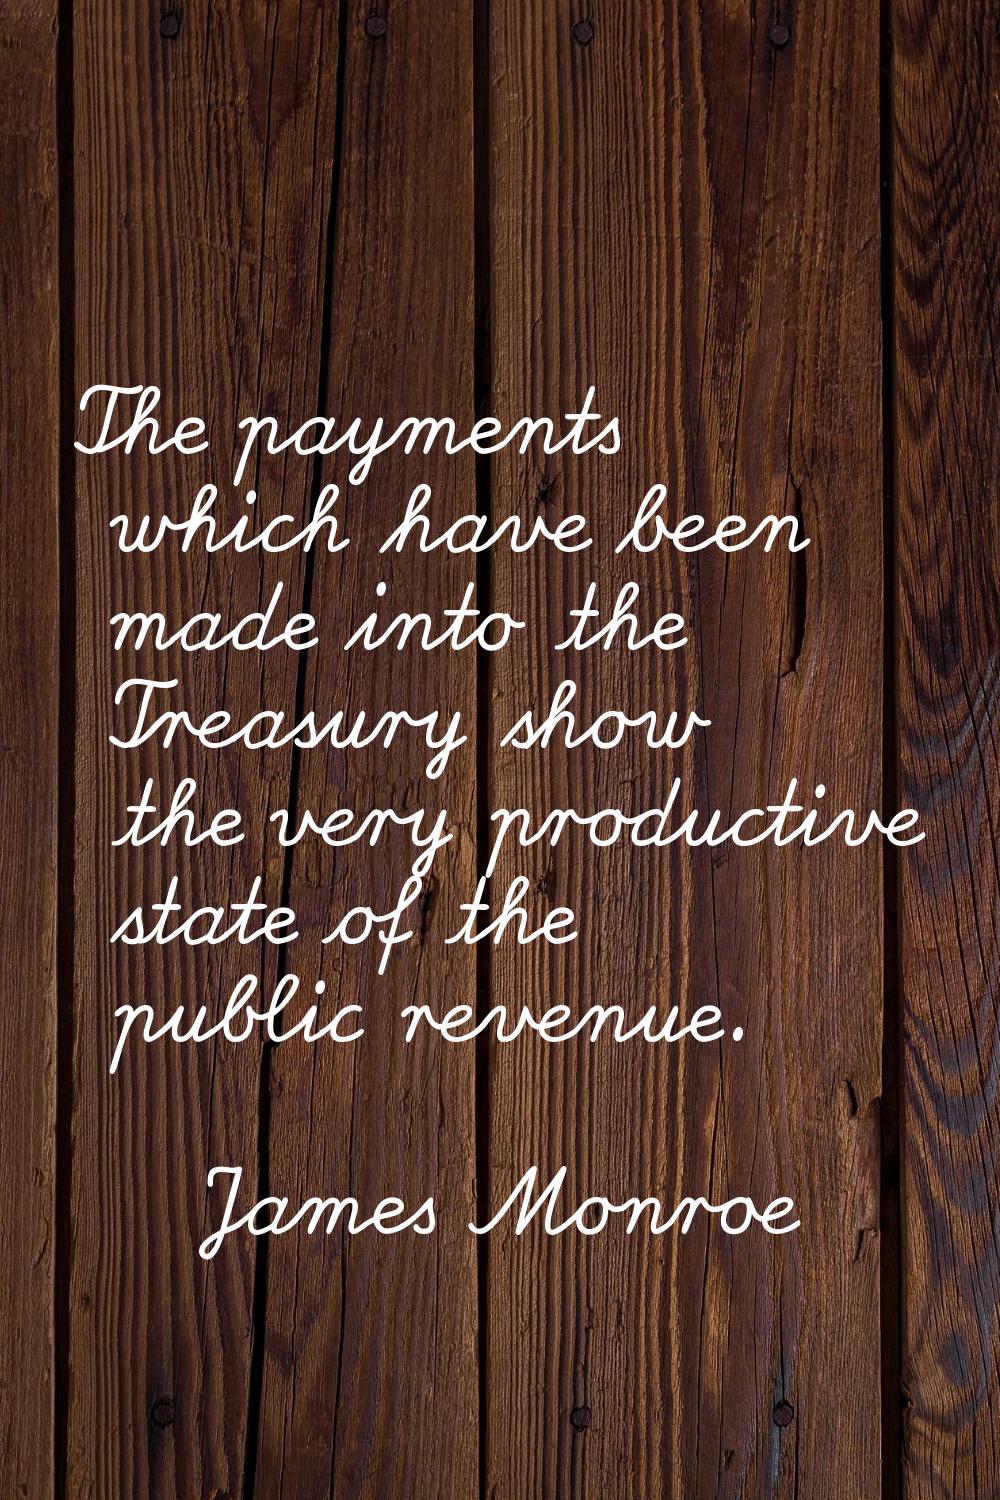 The payments which have been made into the Treasury show the very productive state of the public re